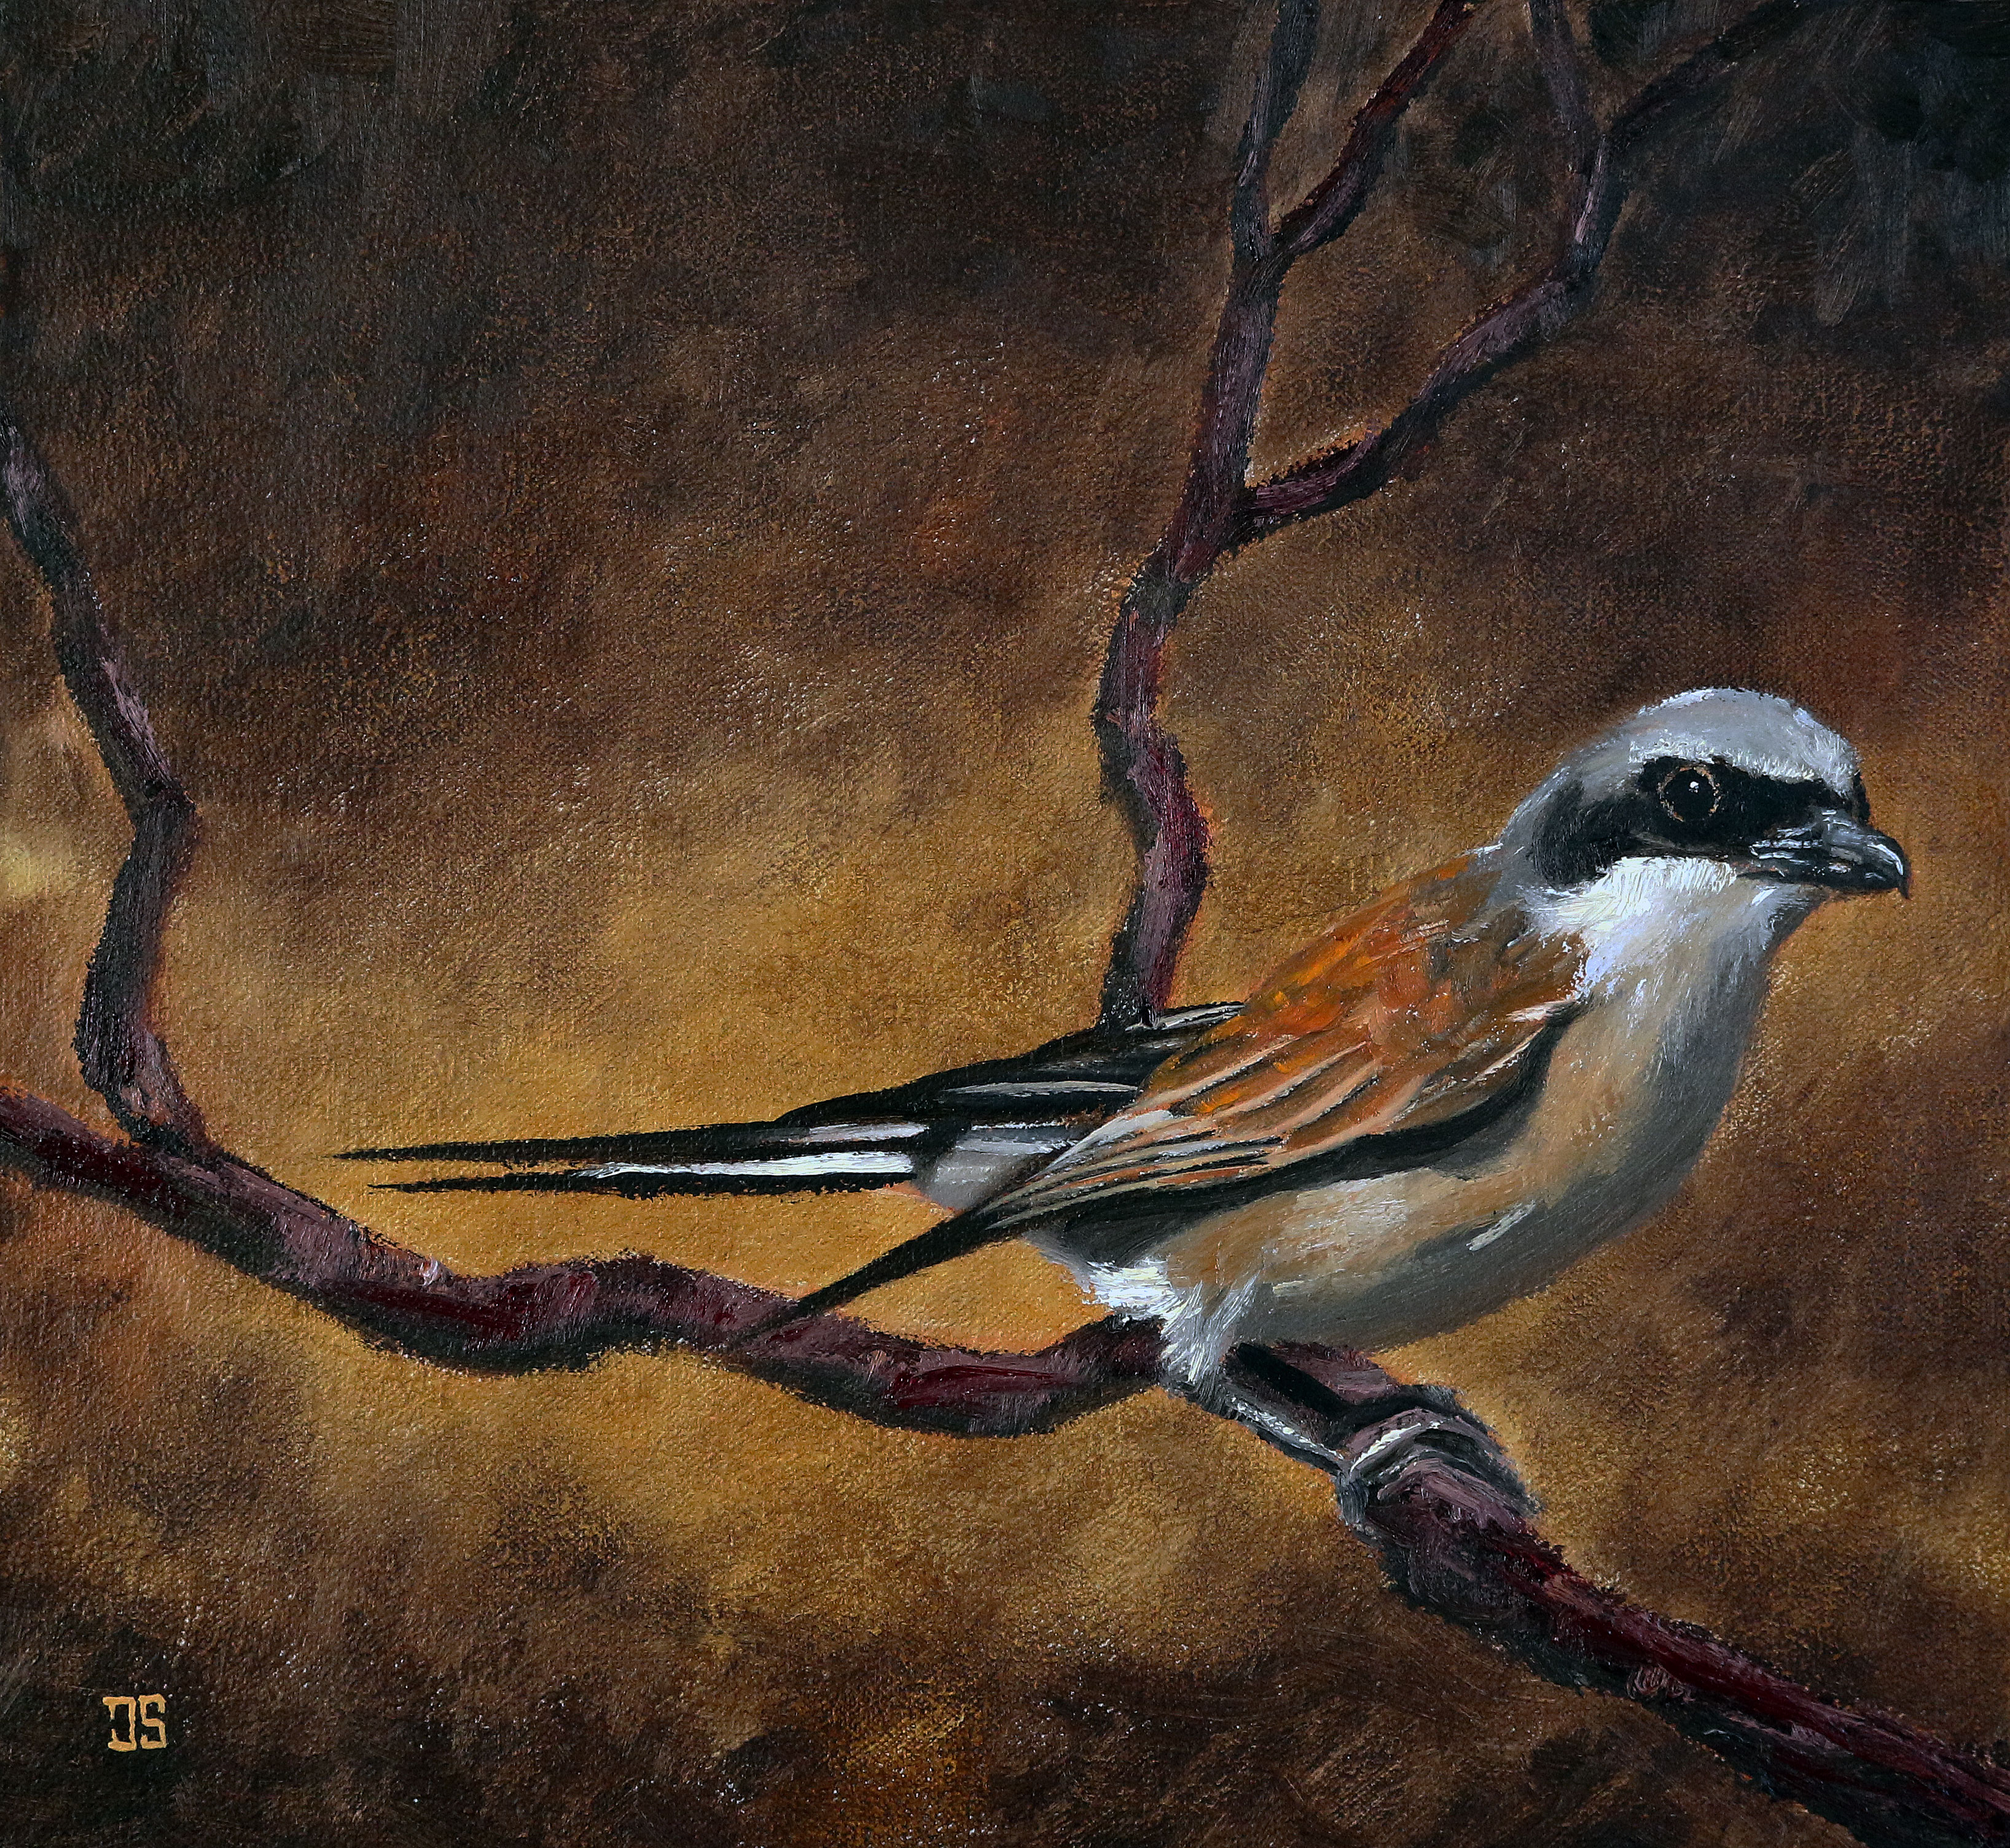 Oil painting "Red-Backed Shrike" by Jeffrey Dale Starr